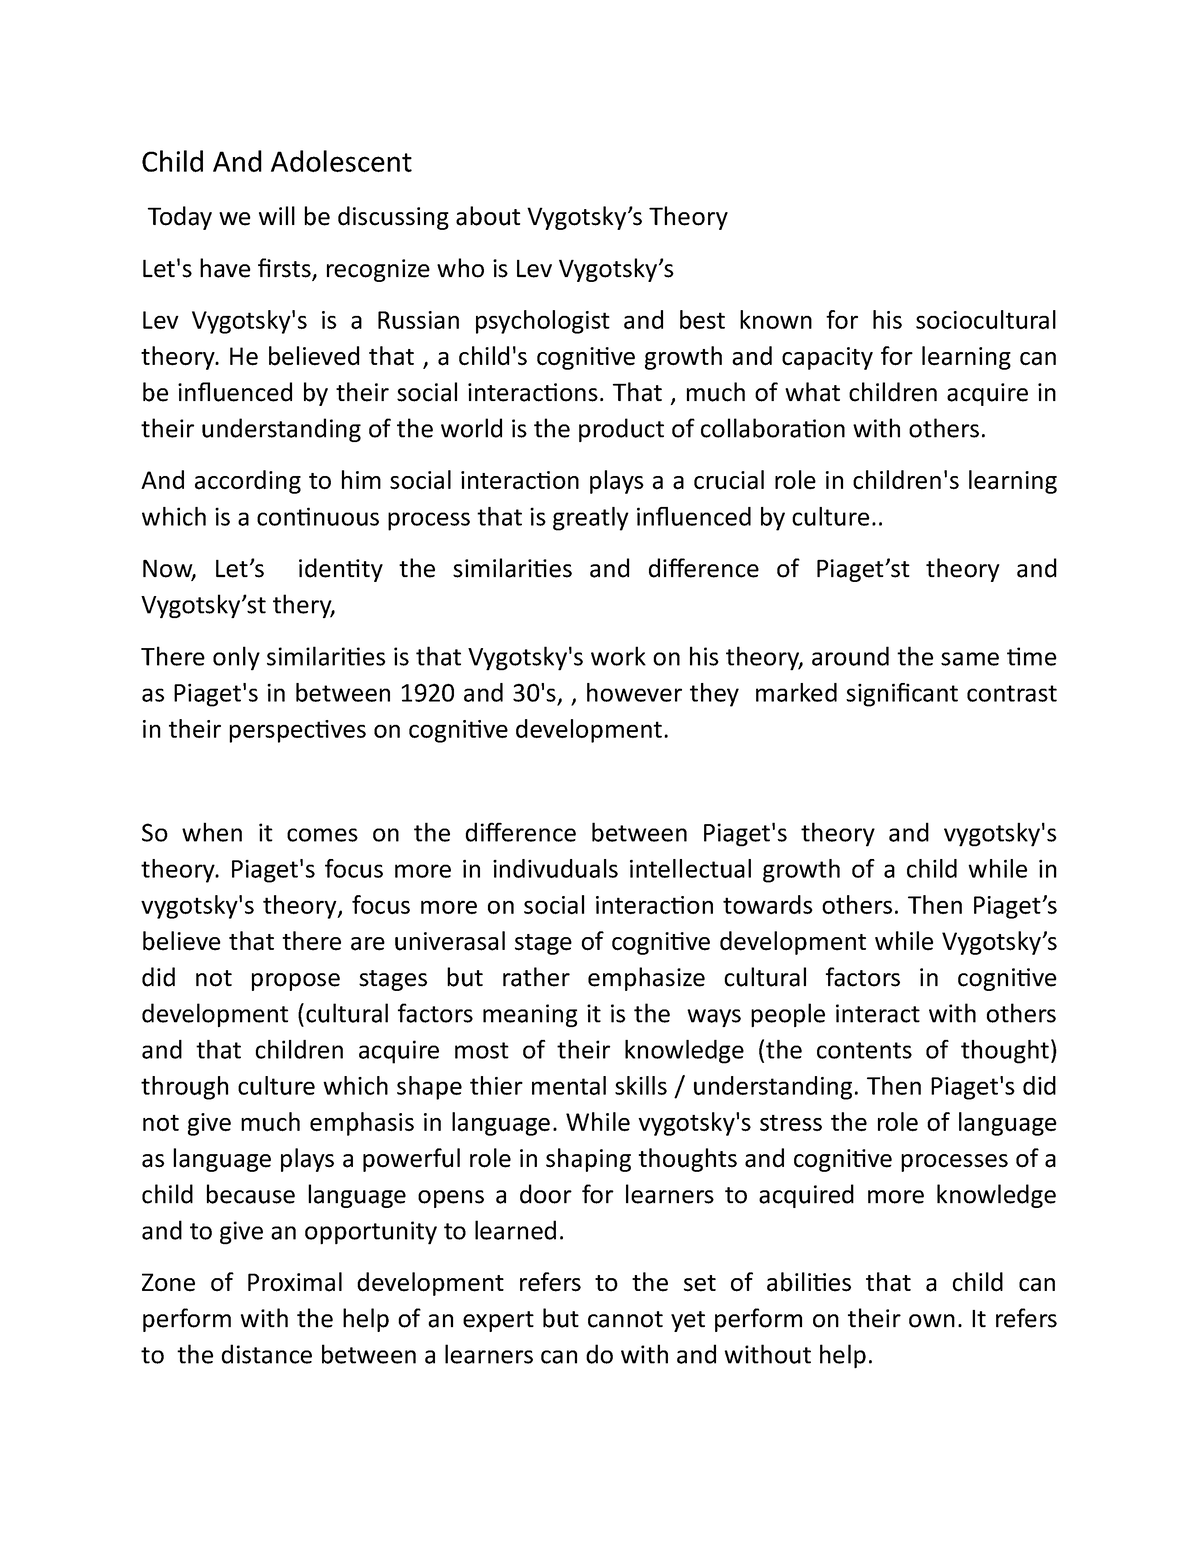 vygotsky theory research paper